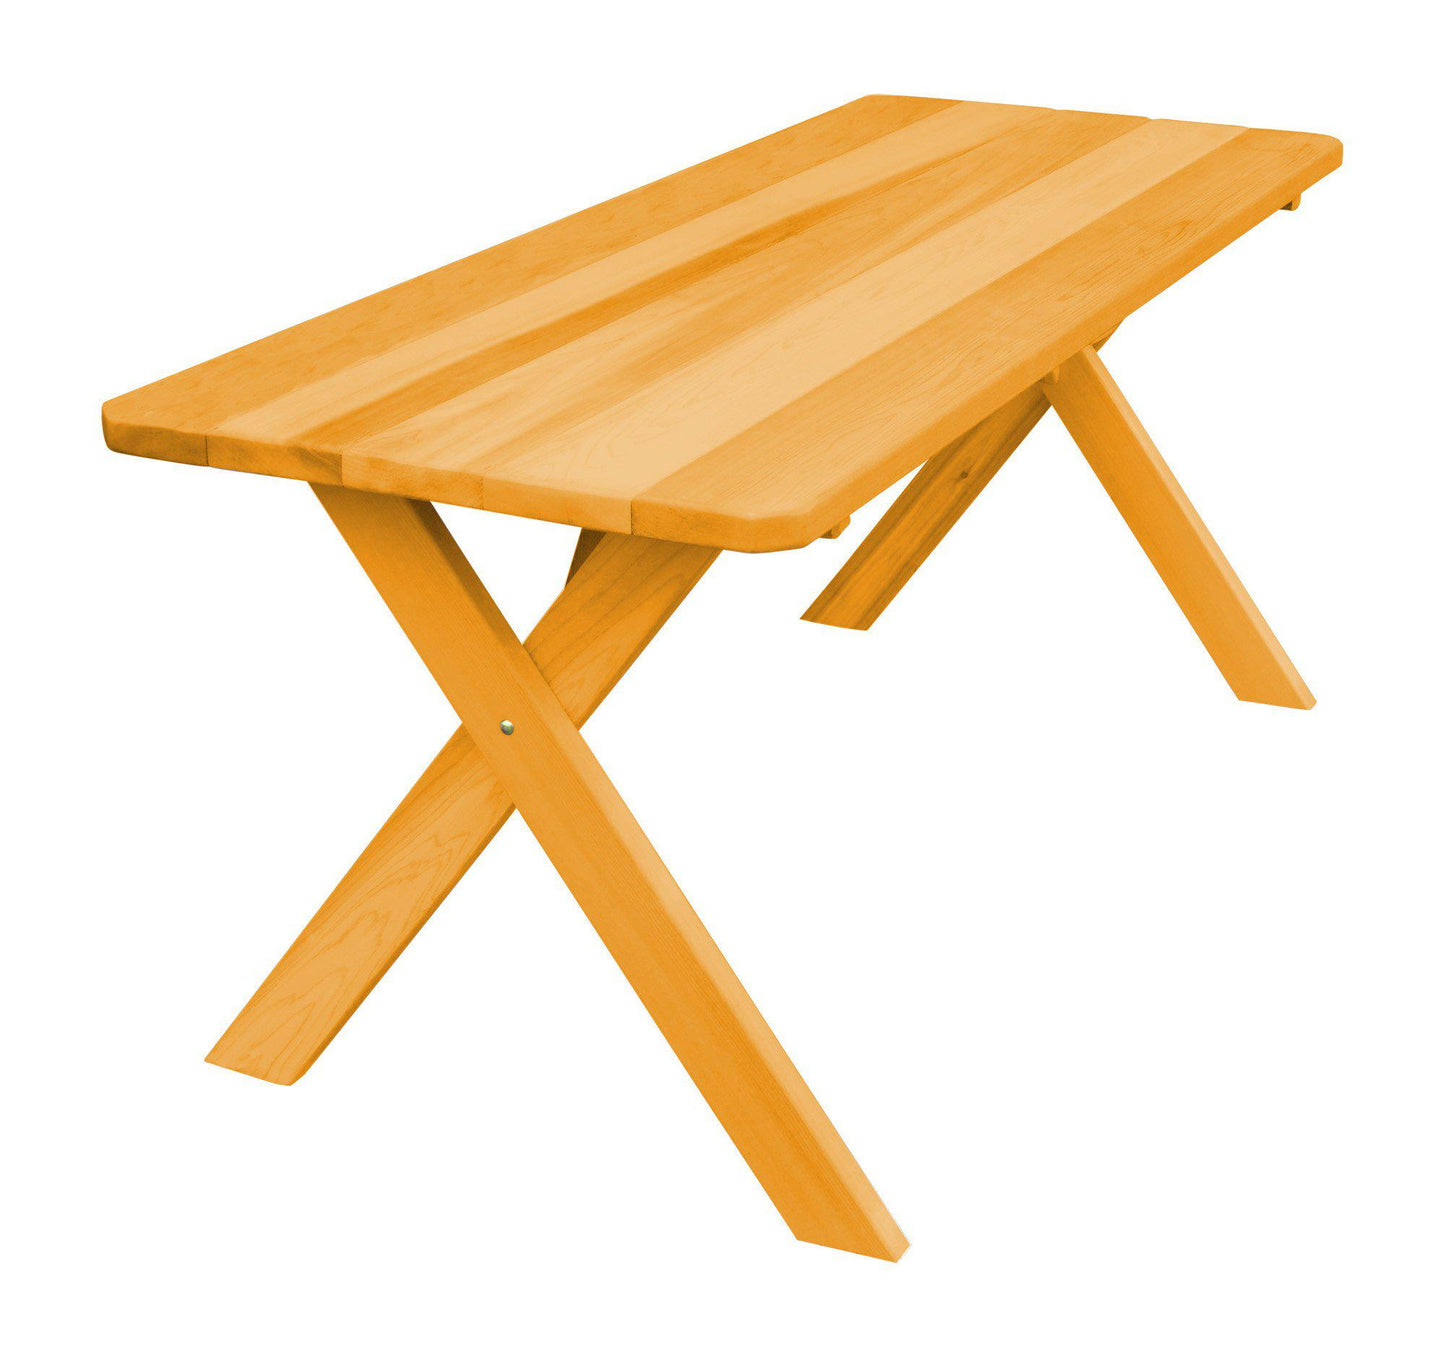 Regallion Outdoor Western Red Cedar 94" Cross-leg Table Only - LEAD TIME TO SHIP 2 WEEKS